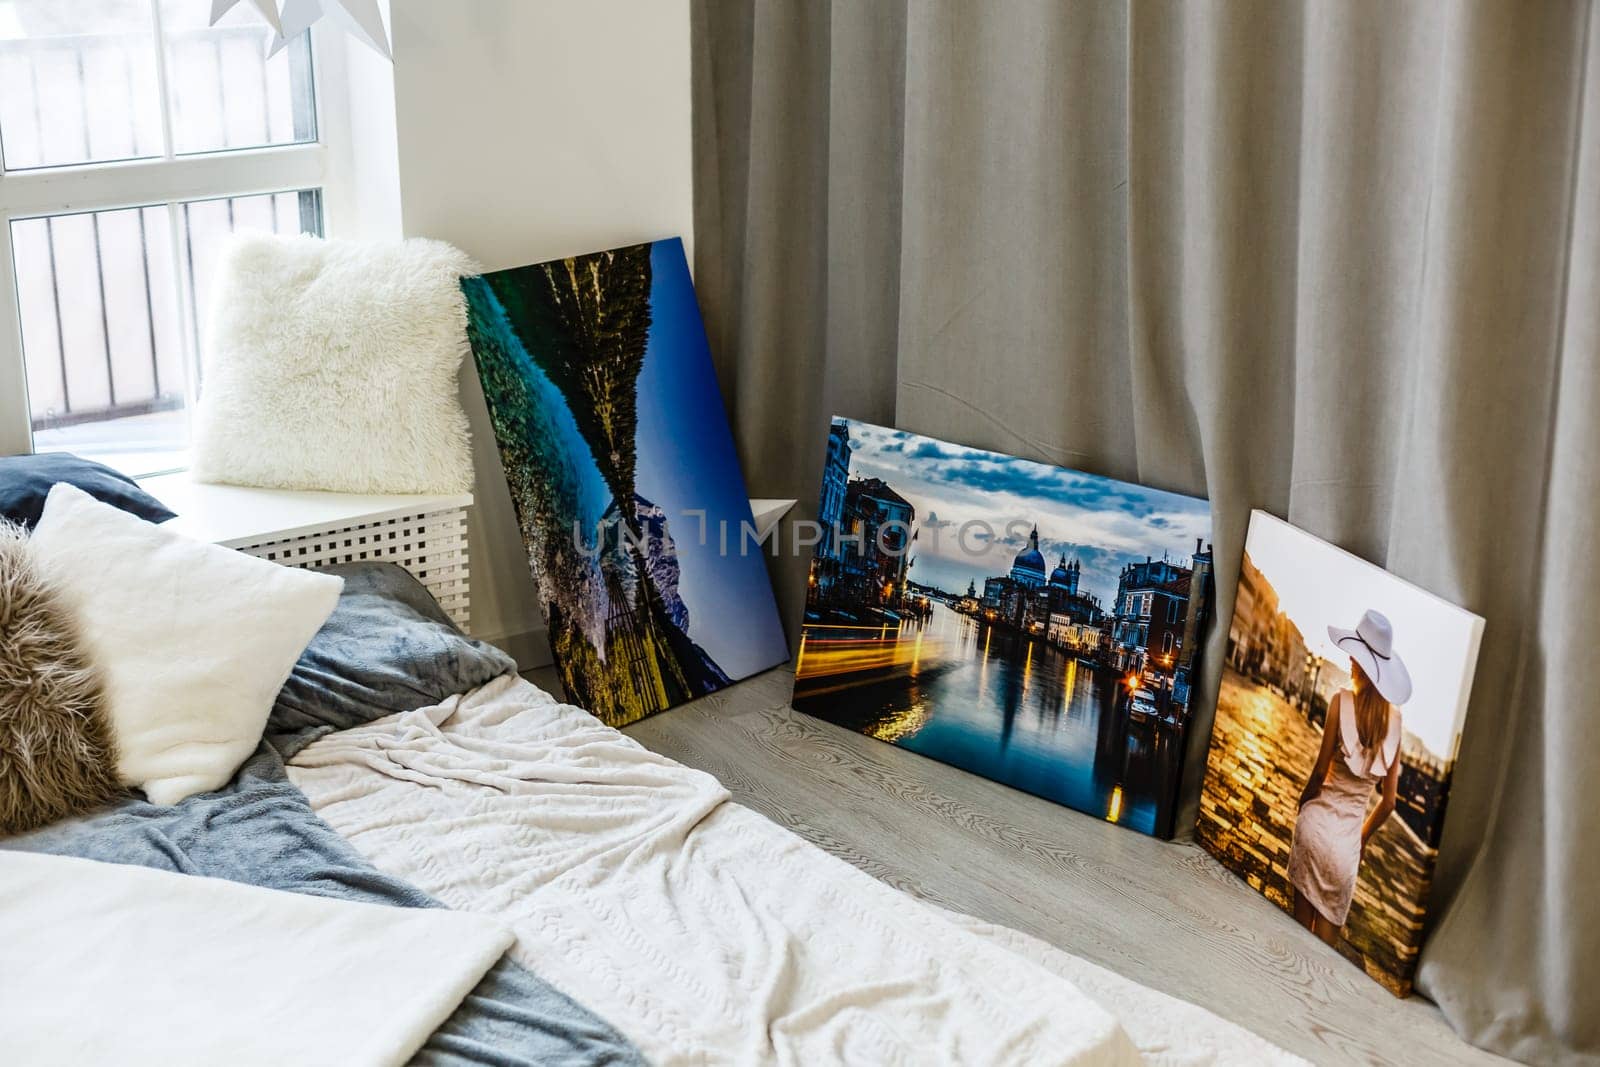 Canvas print in the room. Photo with gallery wrap method of canvas stretching on stretcher bar. Interior decor by Andelov13